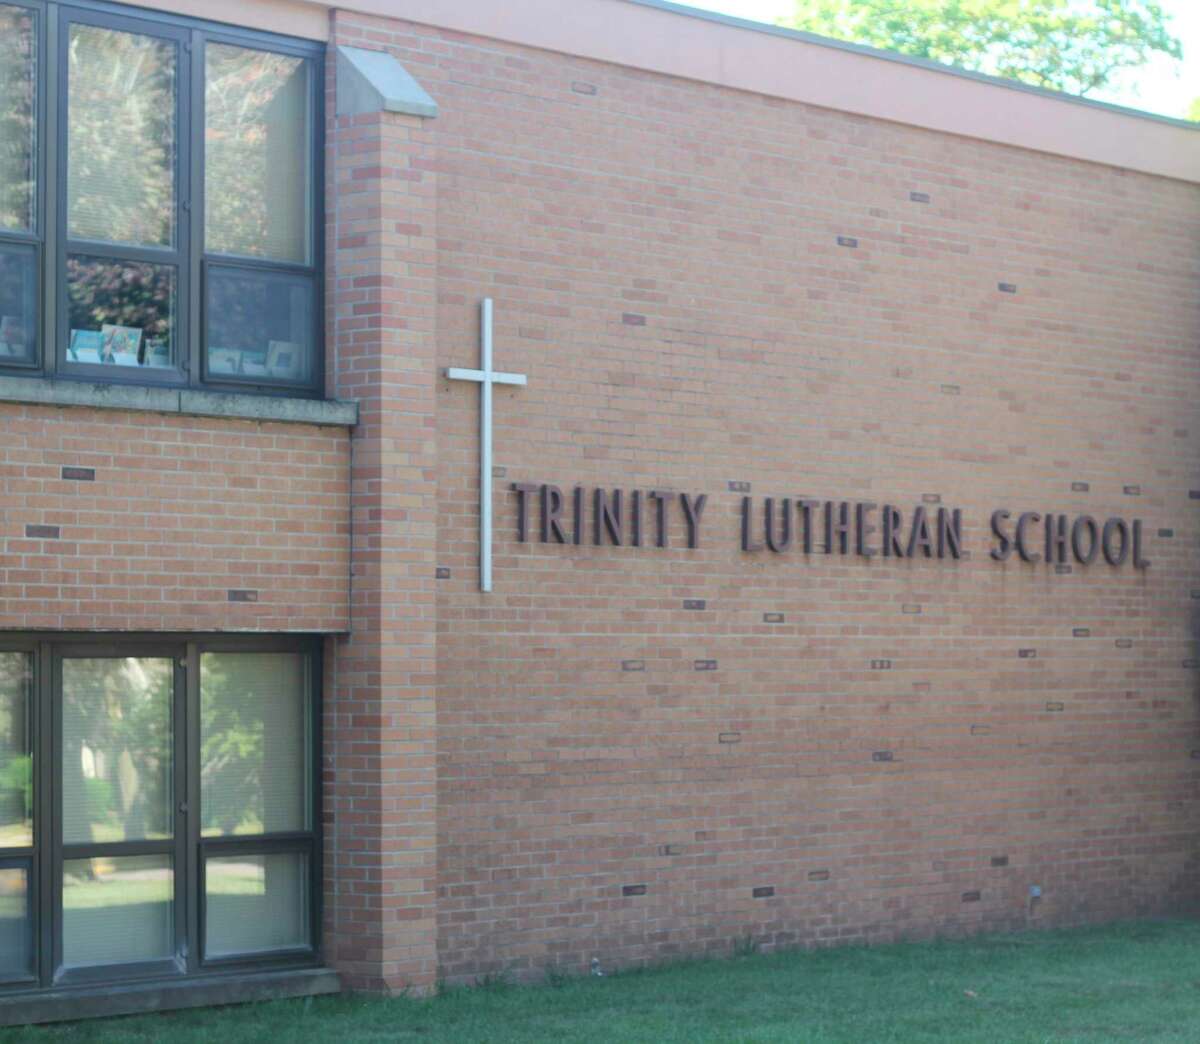 With the first day of school less than three weeks away, Trinity Lutheran School is finalizing plans for a return to the classroom, while also being prepared to switch to distance learning if necessary. (Kyle Kotecki/News Advocate)